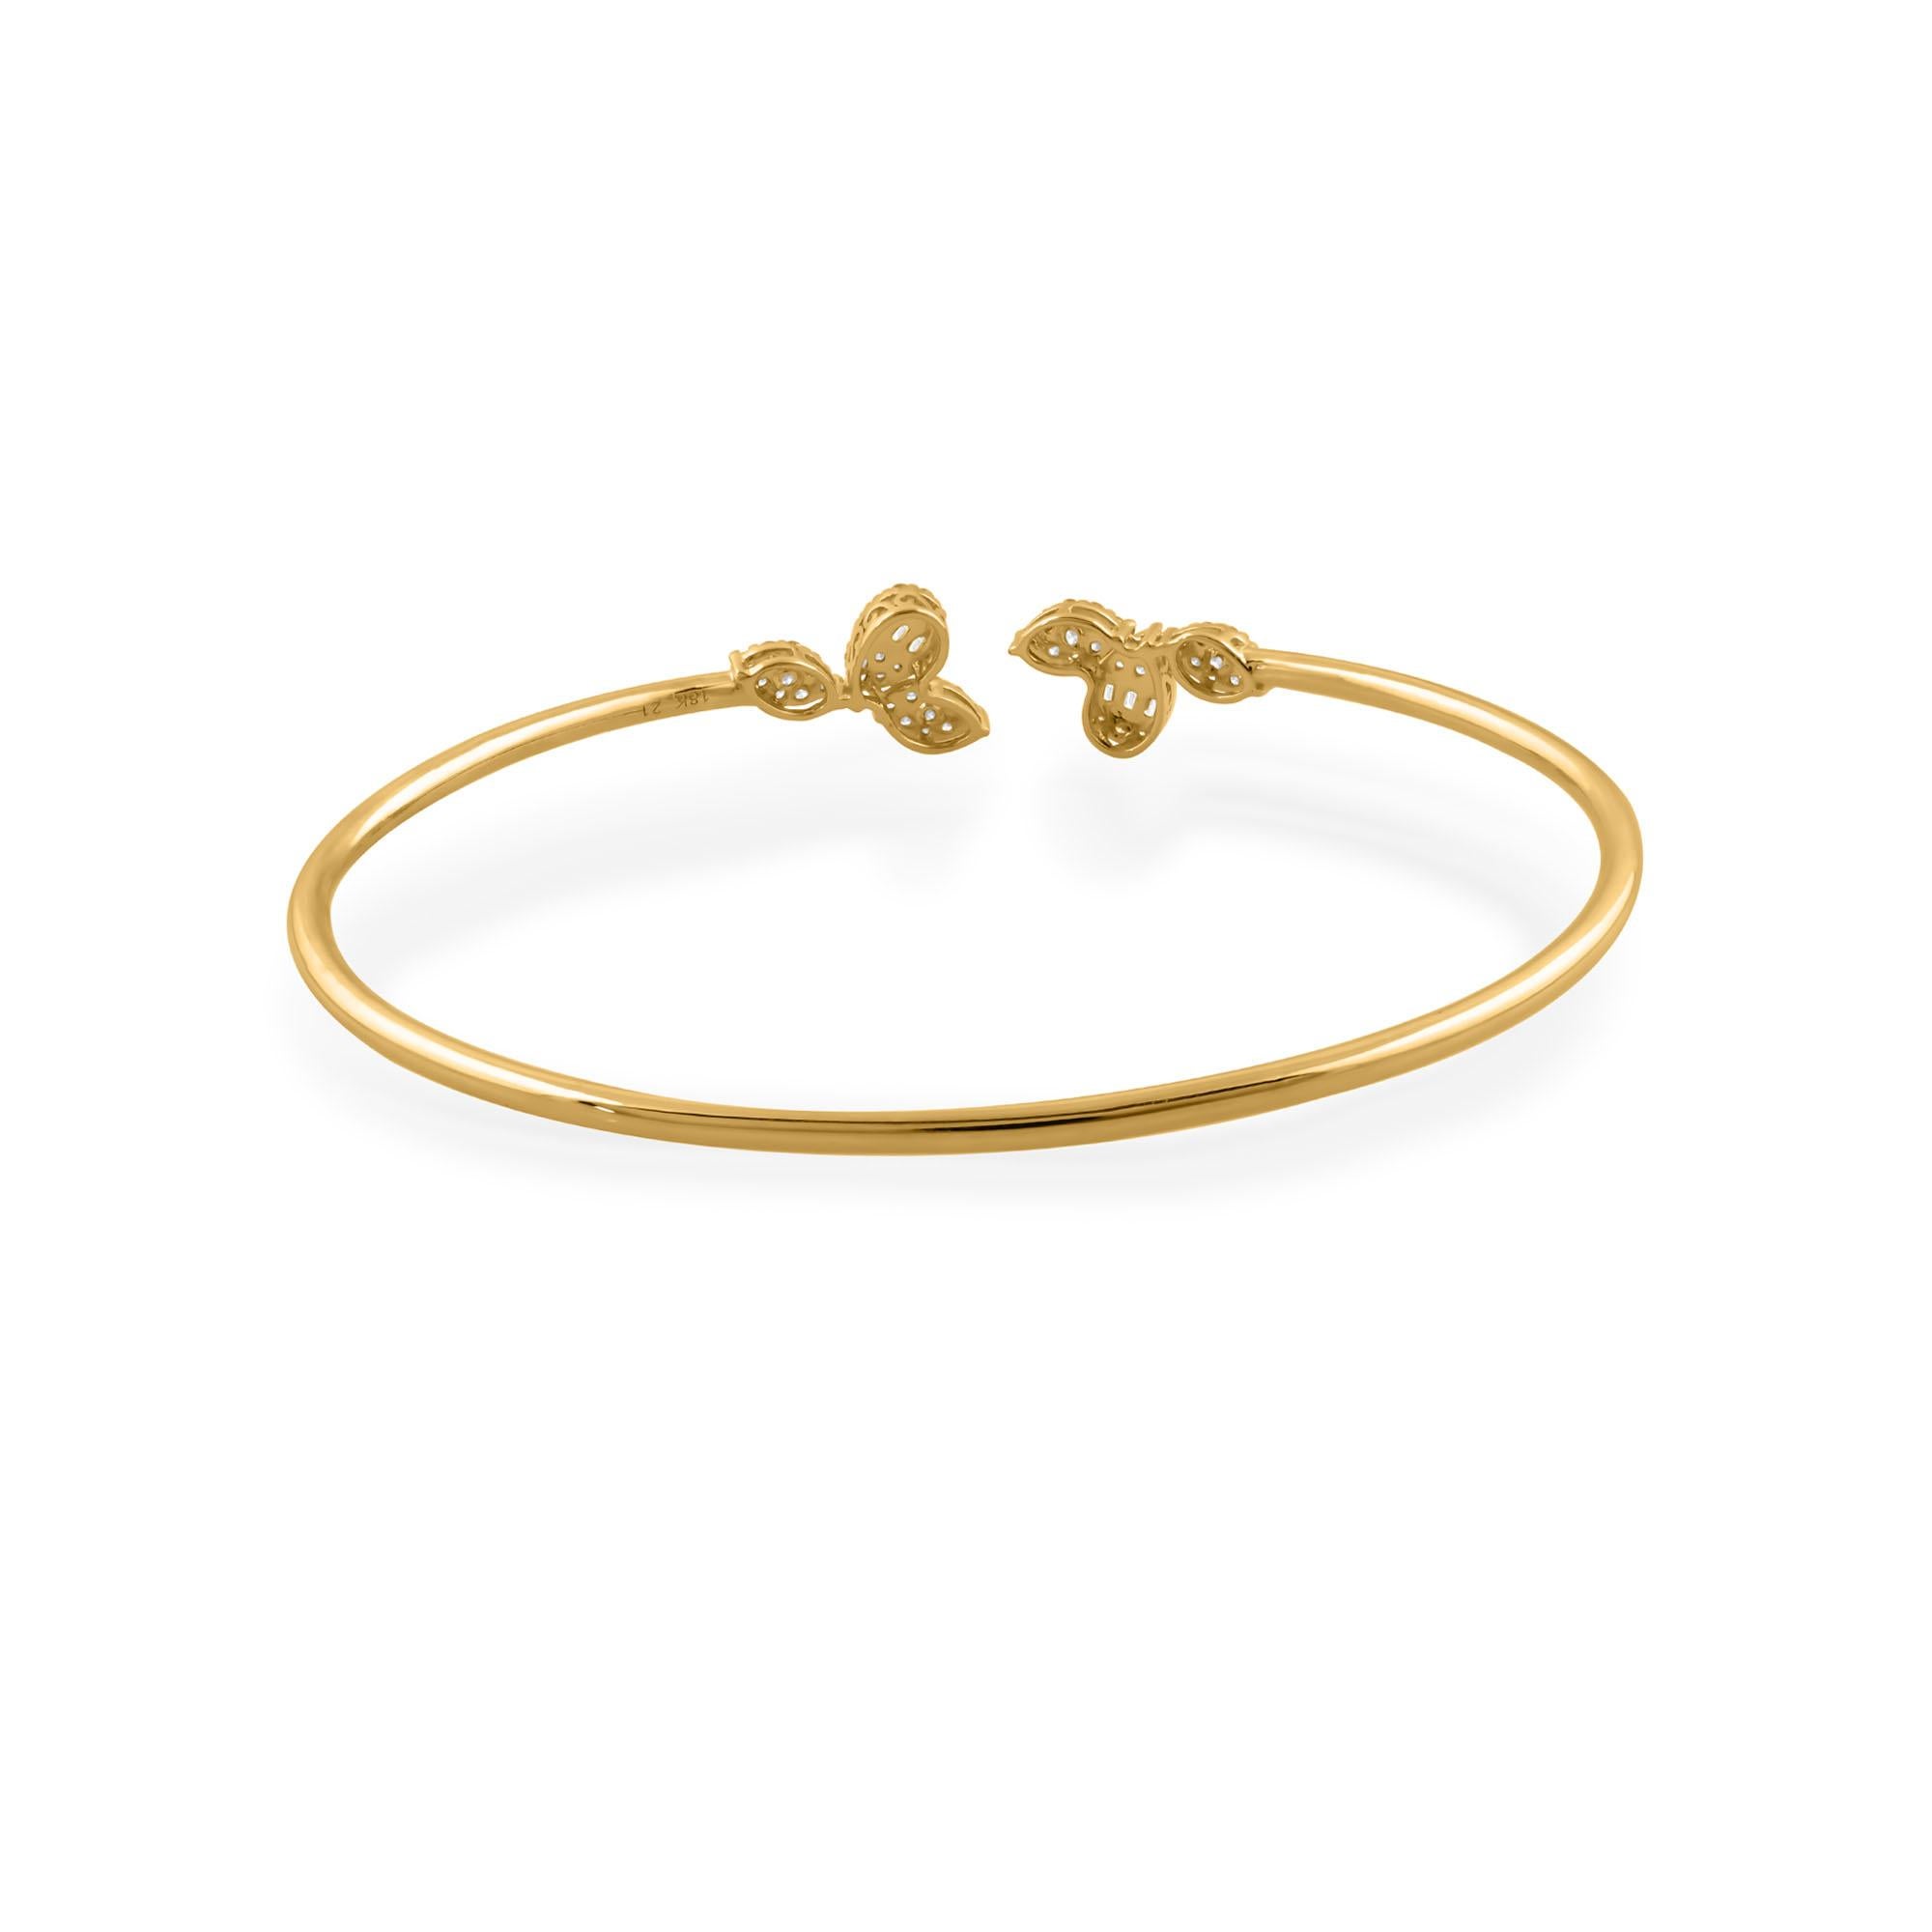 Step into the world of refined elegance with this captivating 0.60 Carat Baguette Diamond Cuff Bangle Bracelet, a stunning piece of jewelry meticulously crafted in luxurious 14 Karat Yellow Gold. Embodying sophistication and grace, this bracelet is